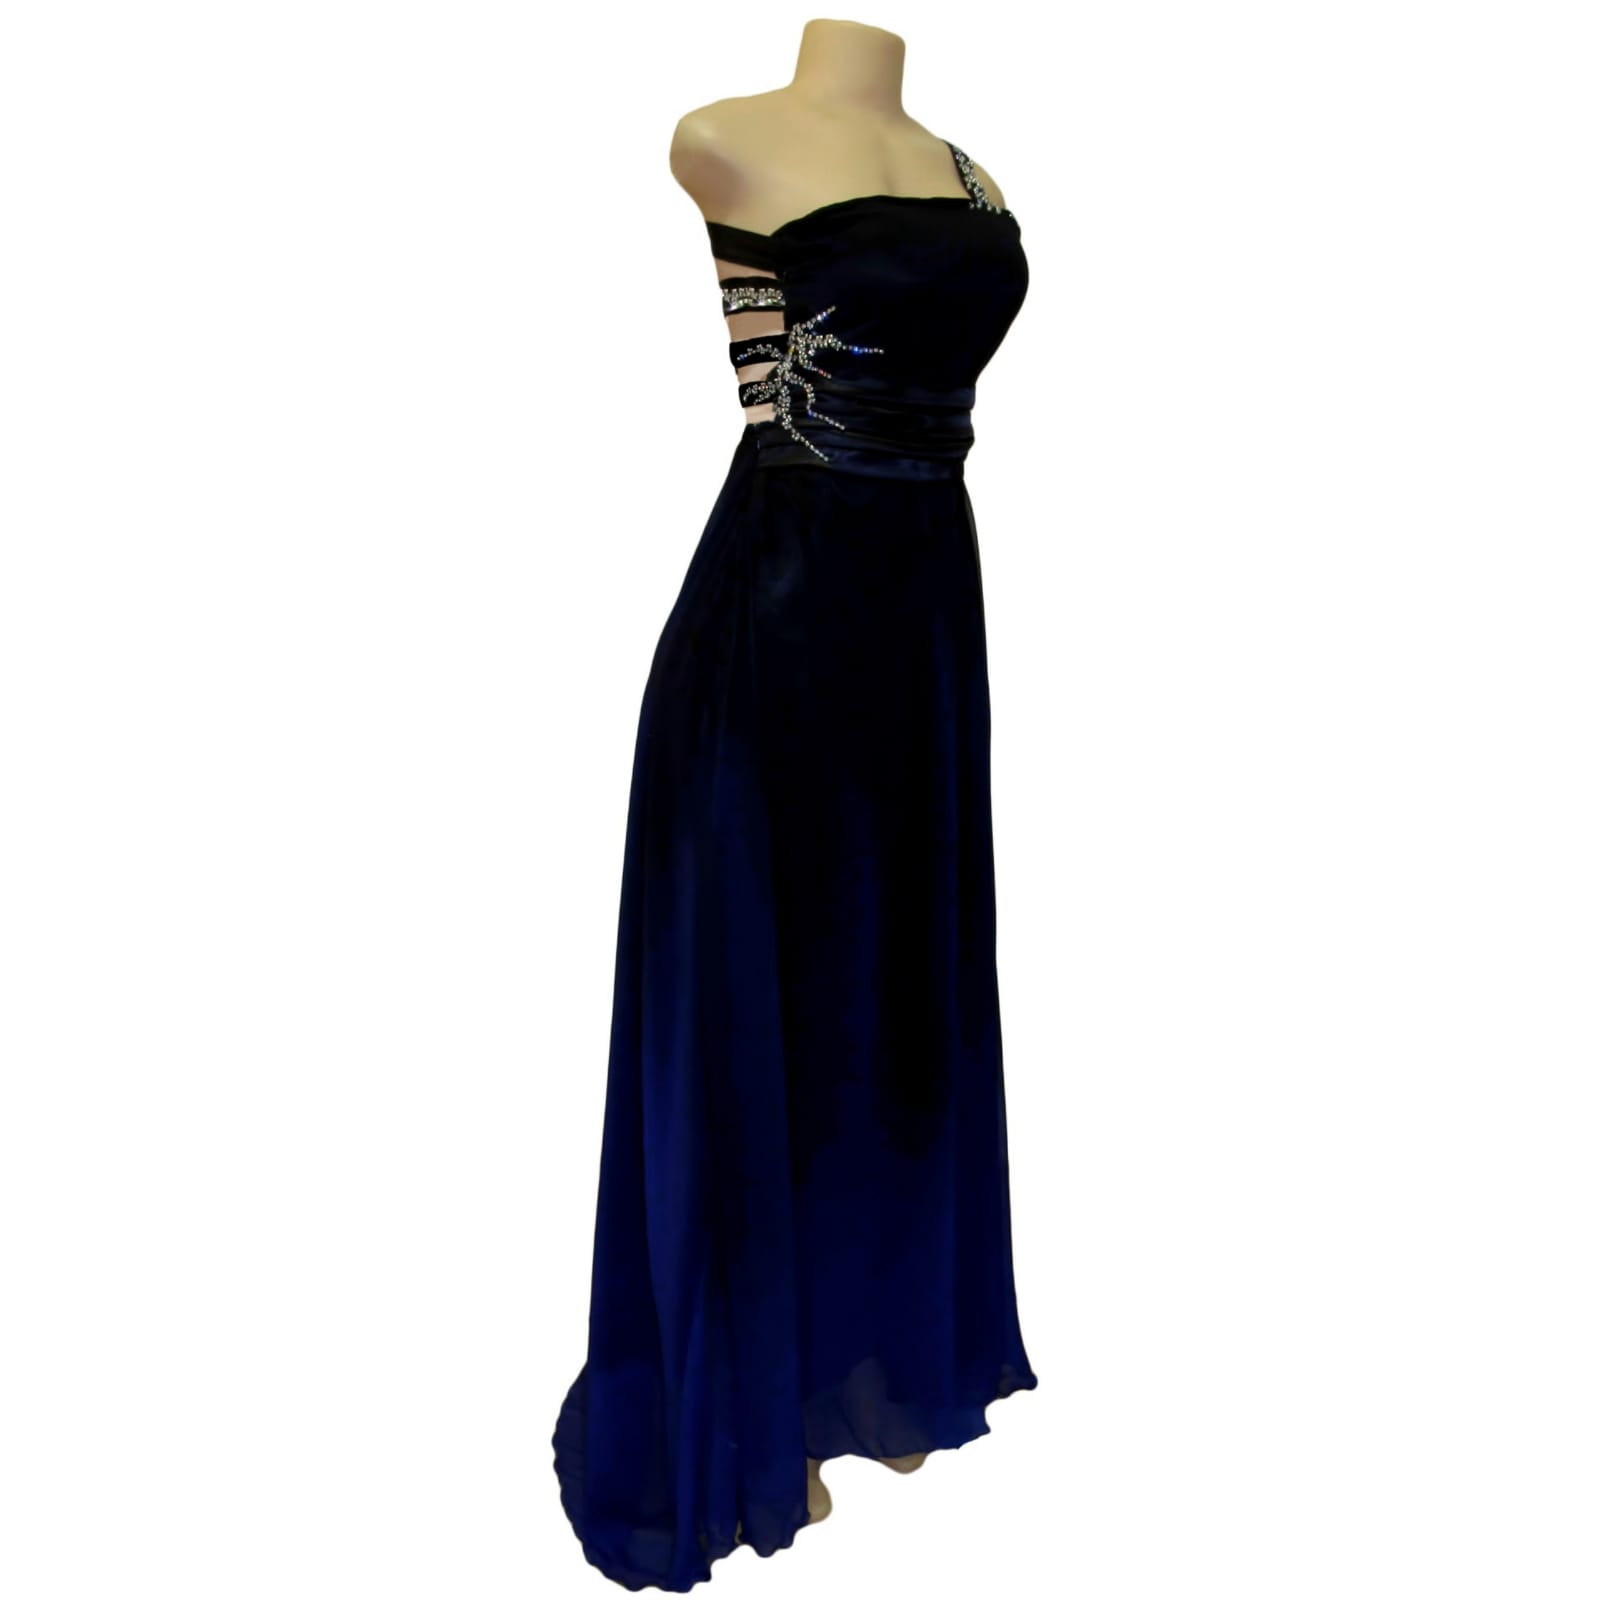 Black and royal blue flowy prom dress with a wide waist band 4 black and royal blue flowy prom dress with a wide waist band, an open back with strap design. With a train and silver detailing.